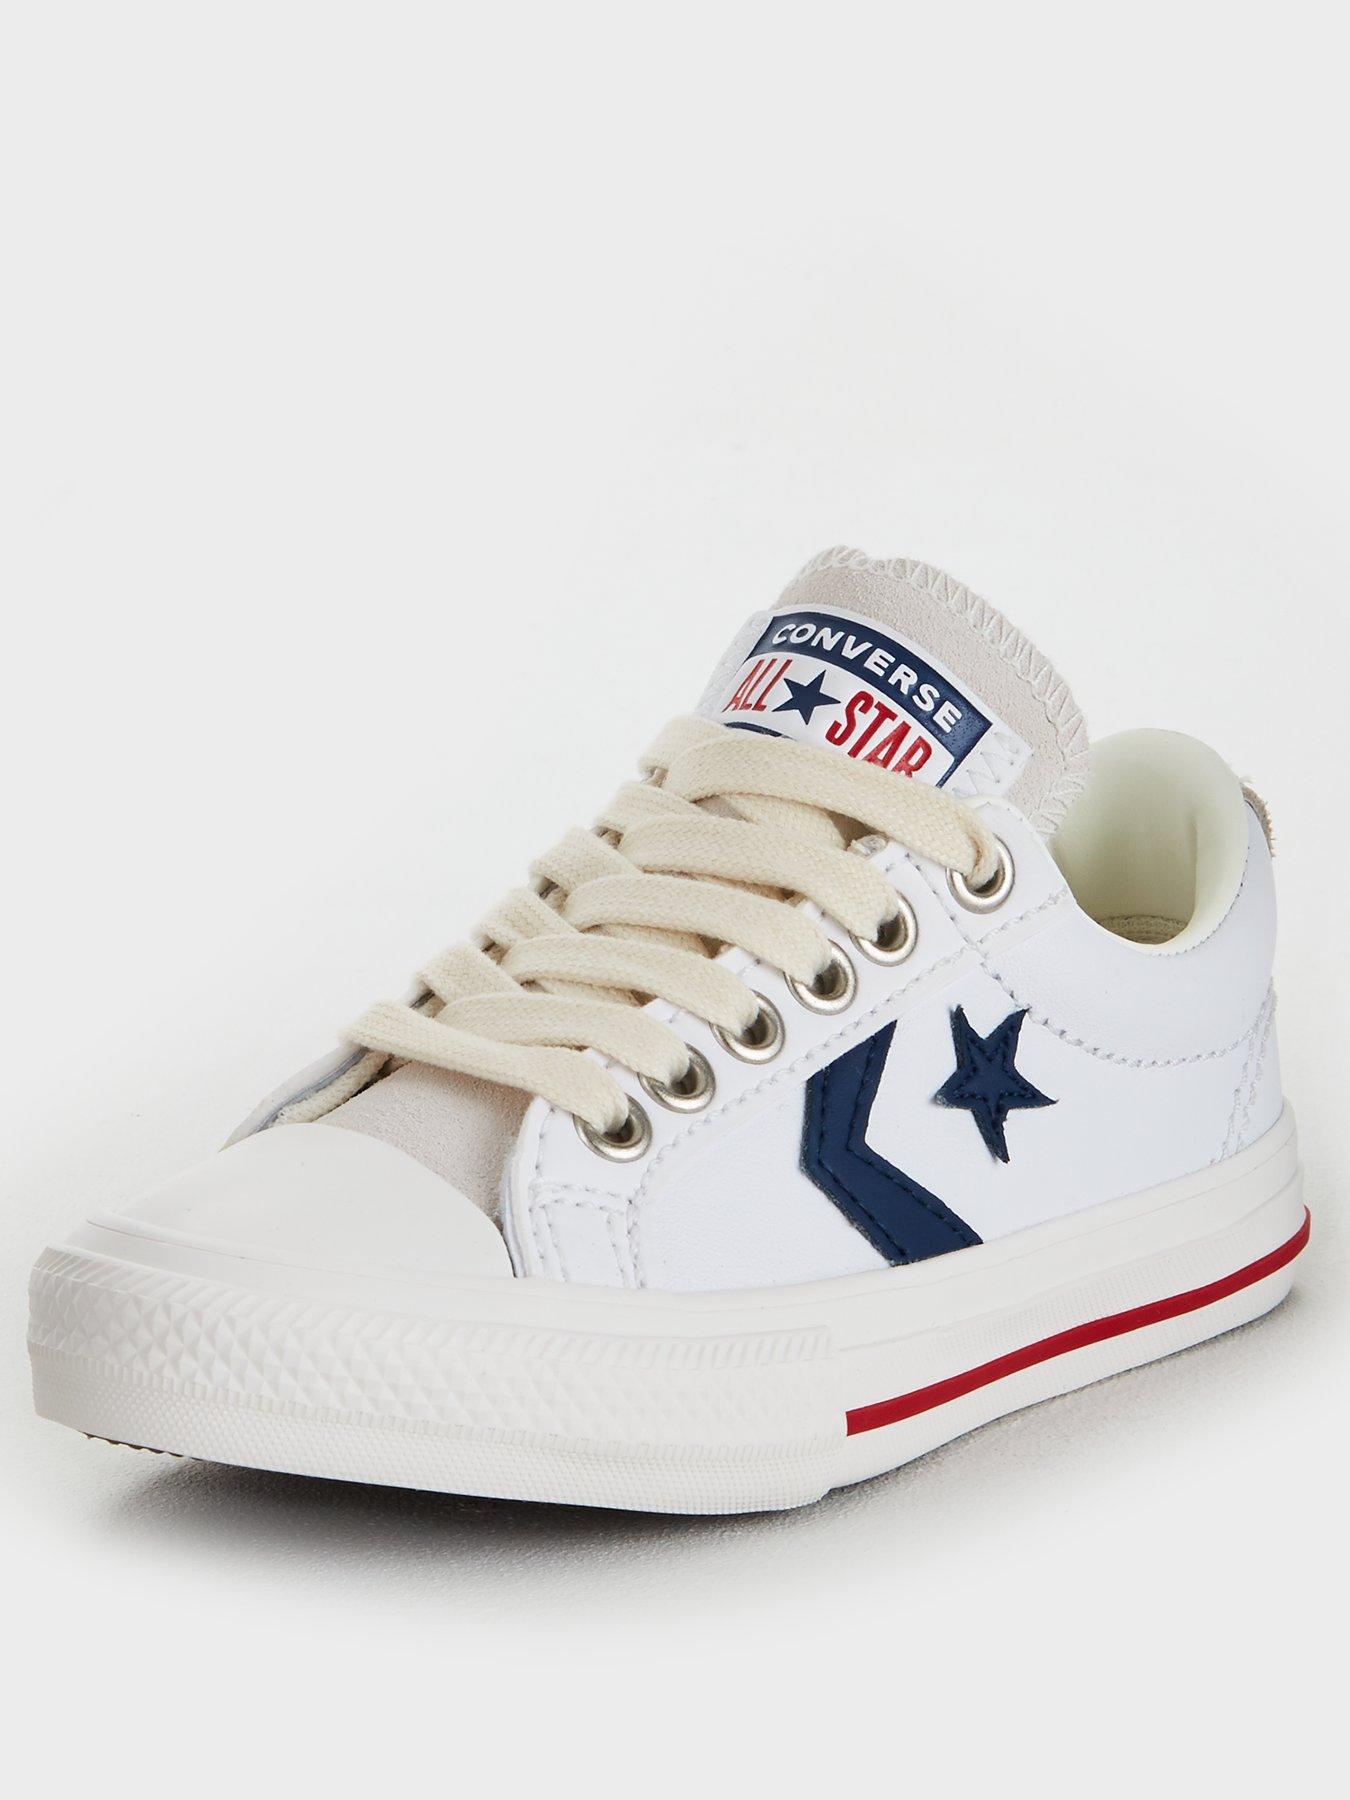 converse lifestyle star player ox